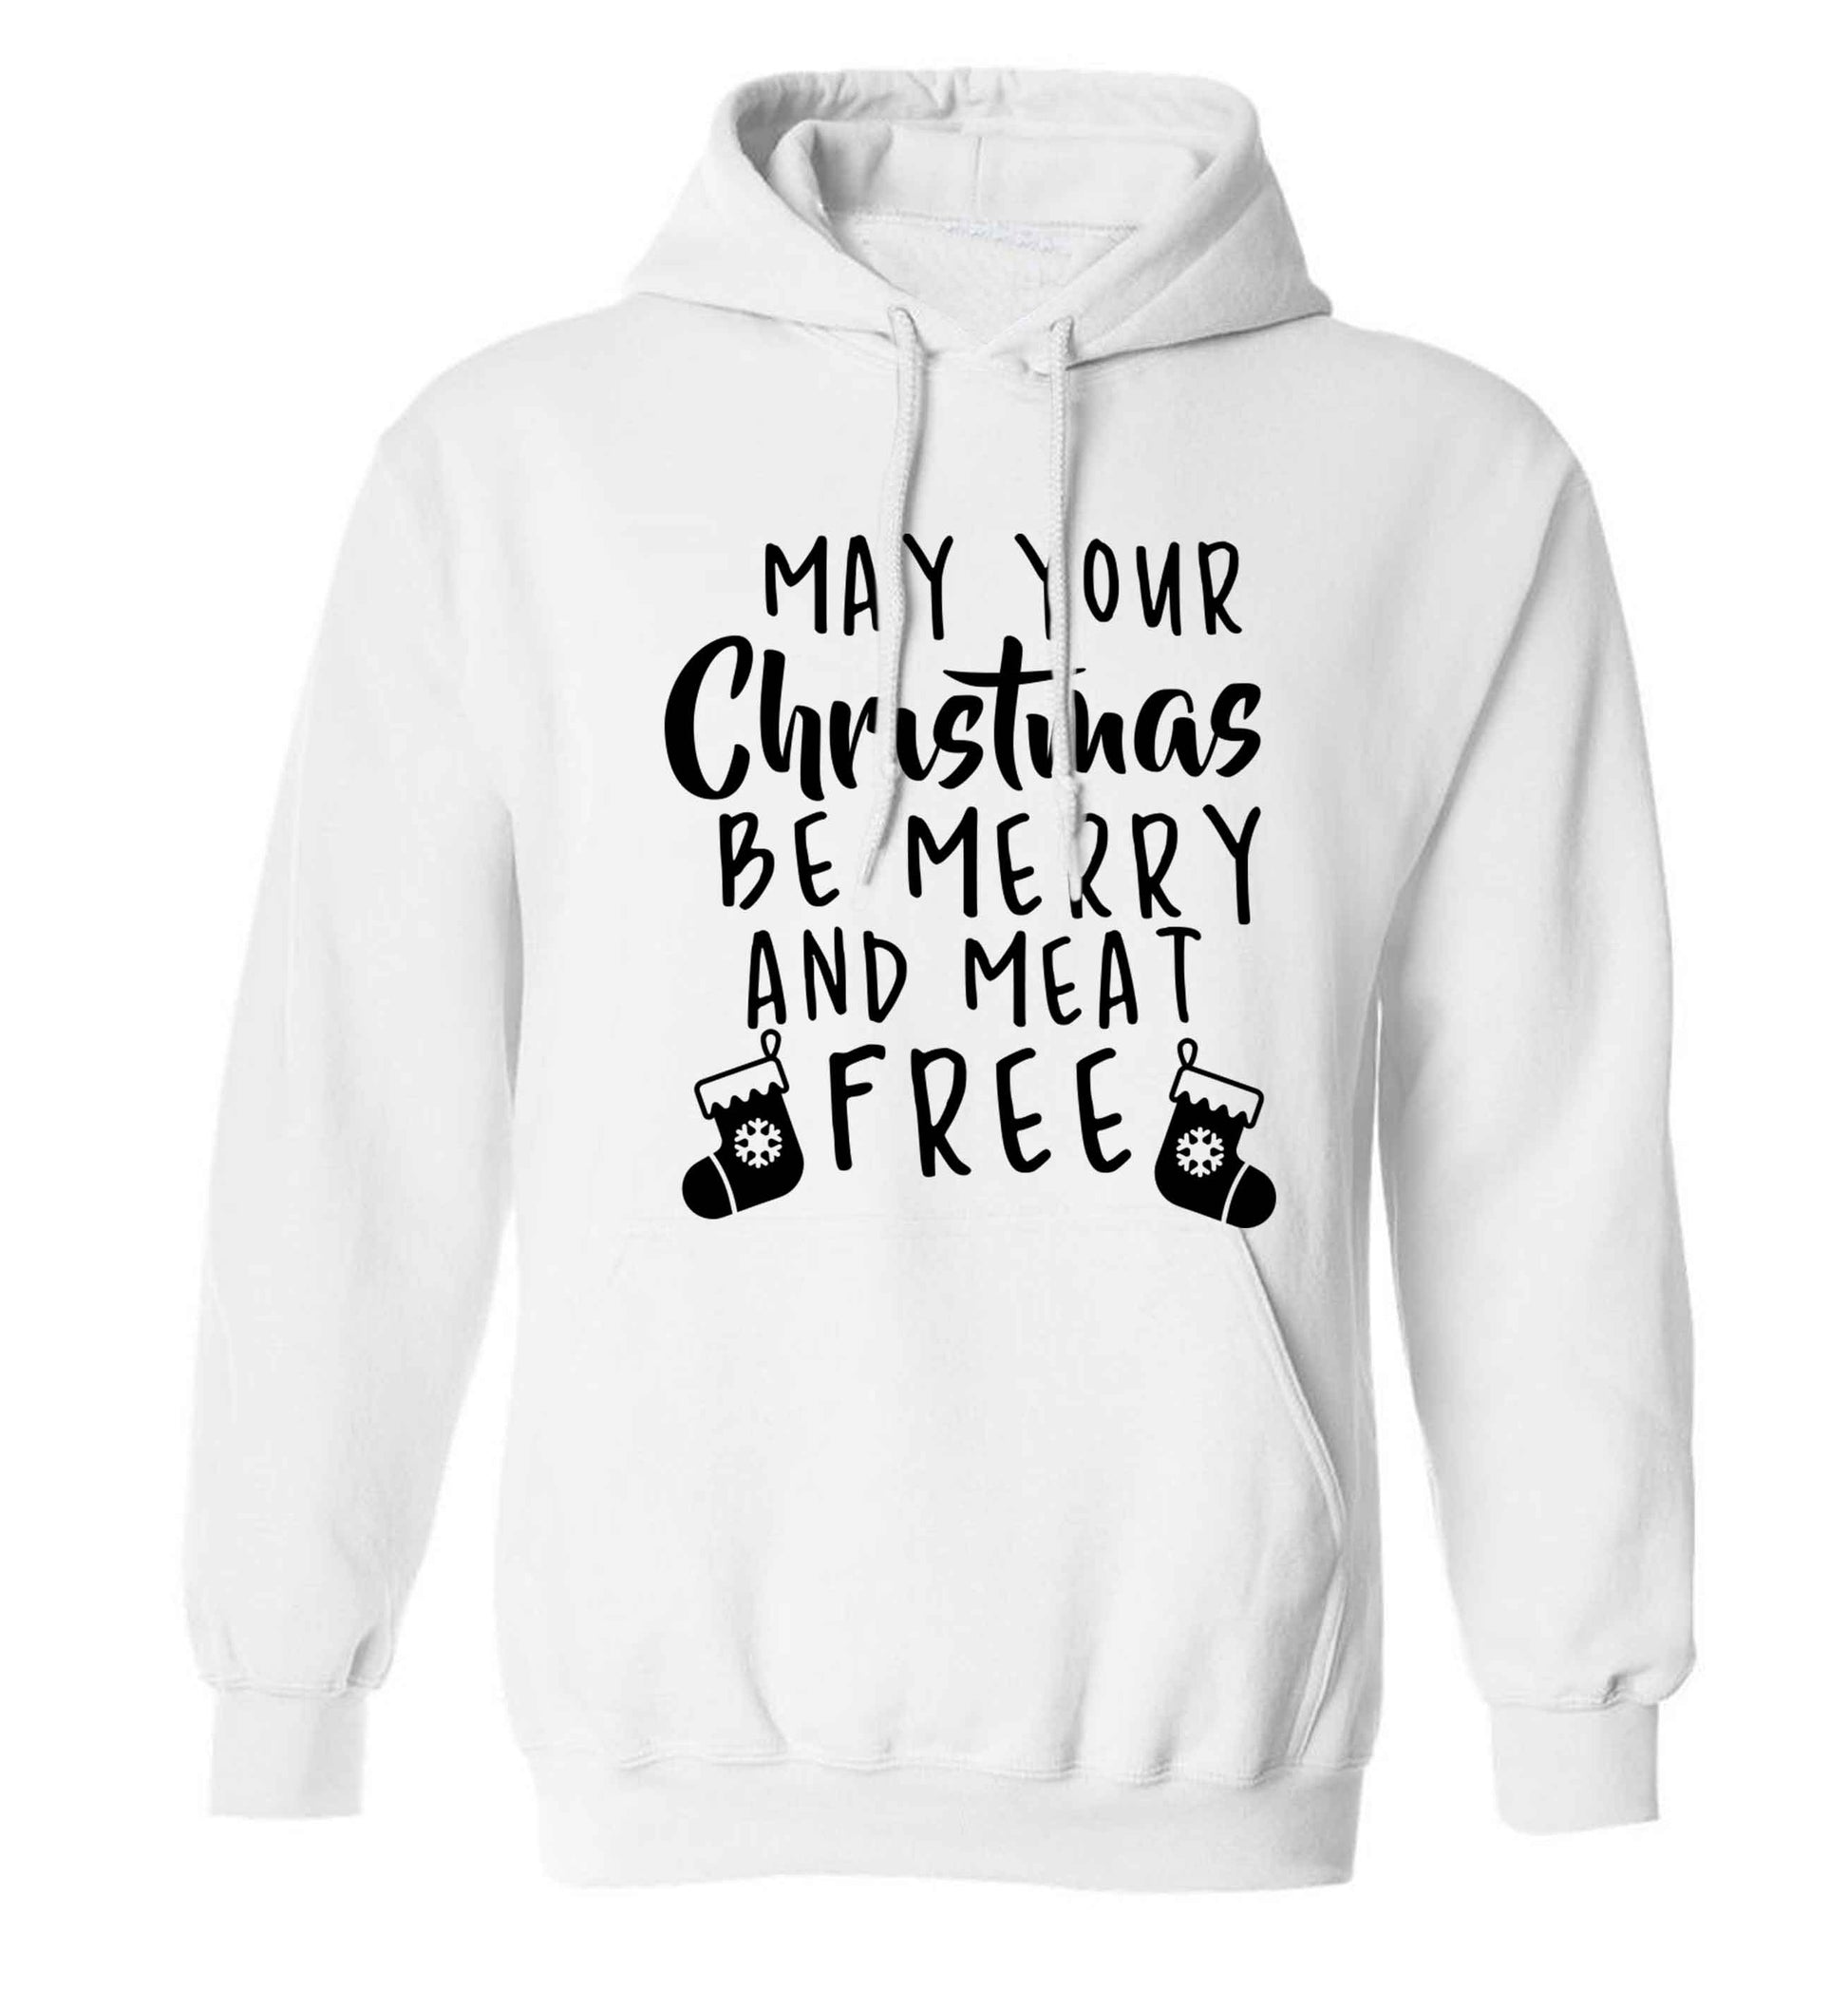 May your Christmas be merry and meat free adults unisex white hoodie 2XL